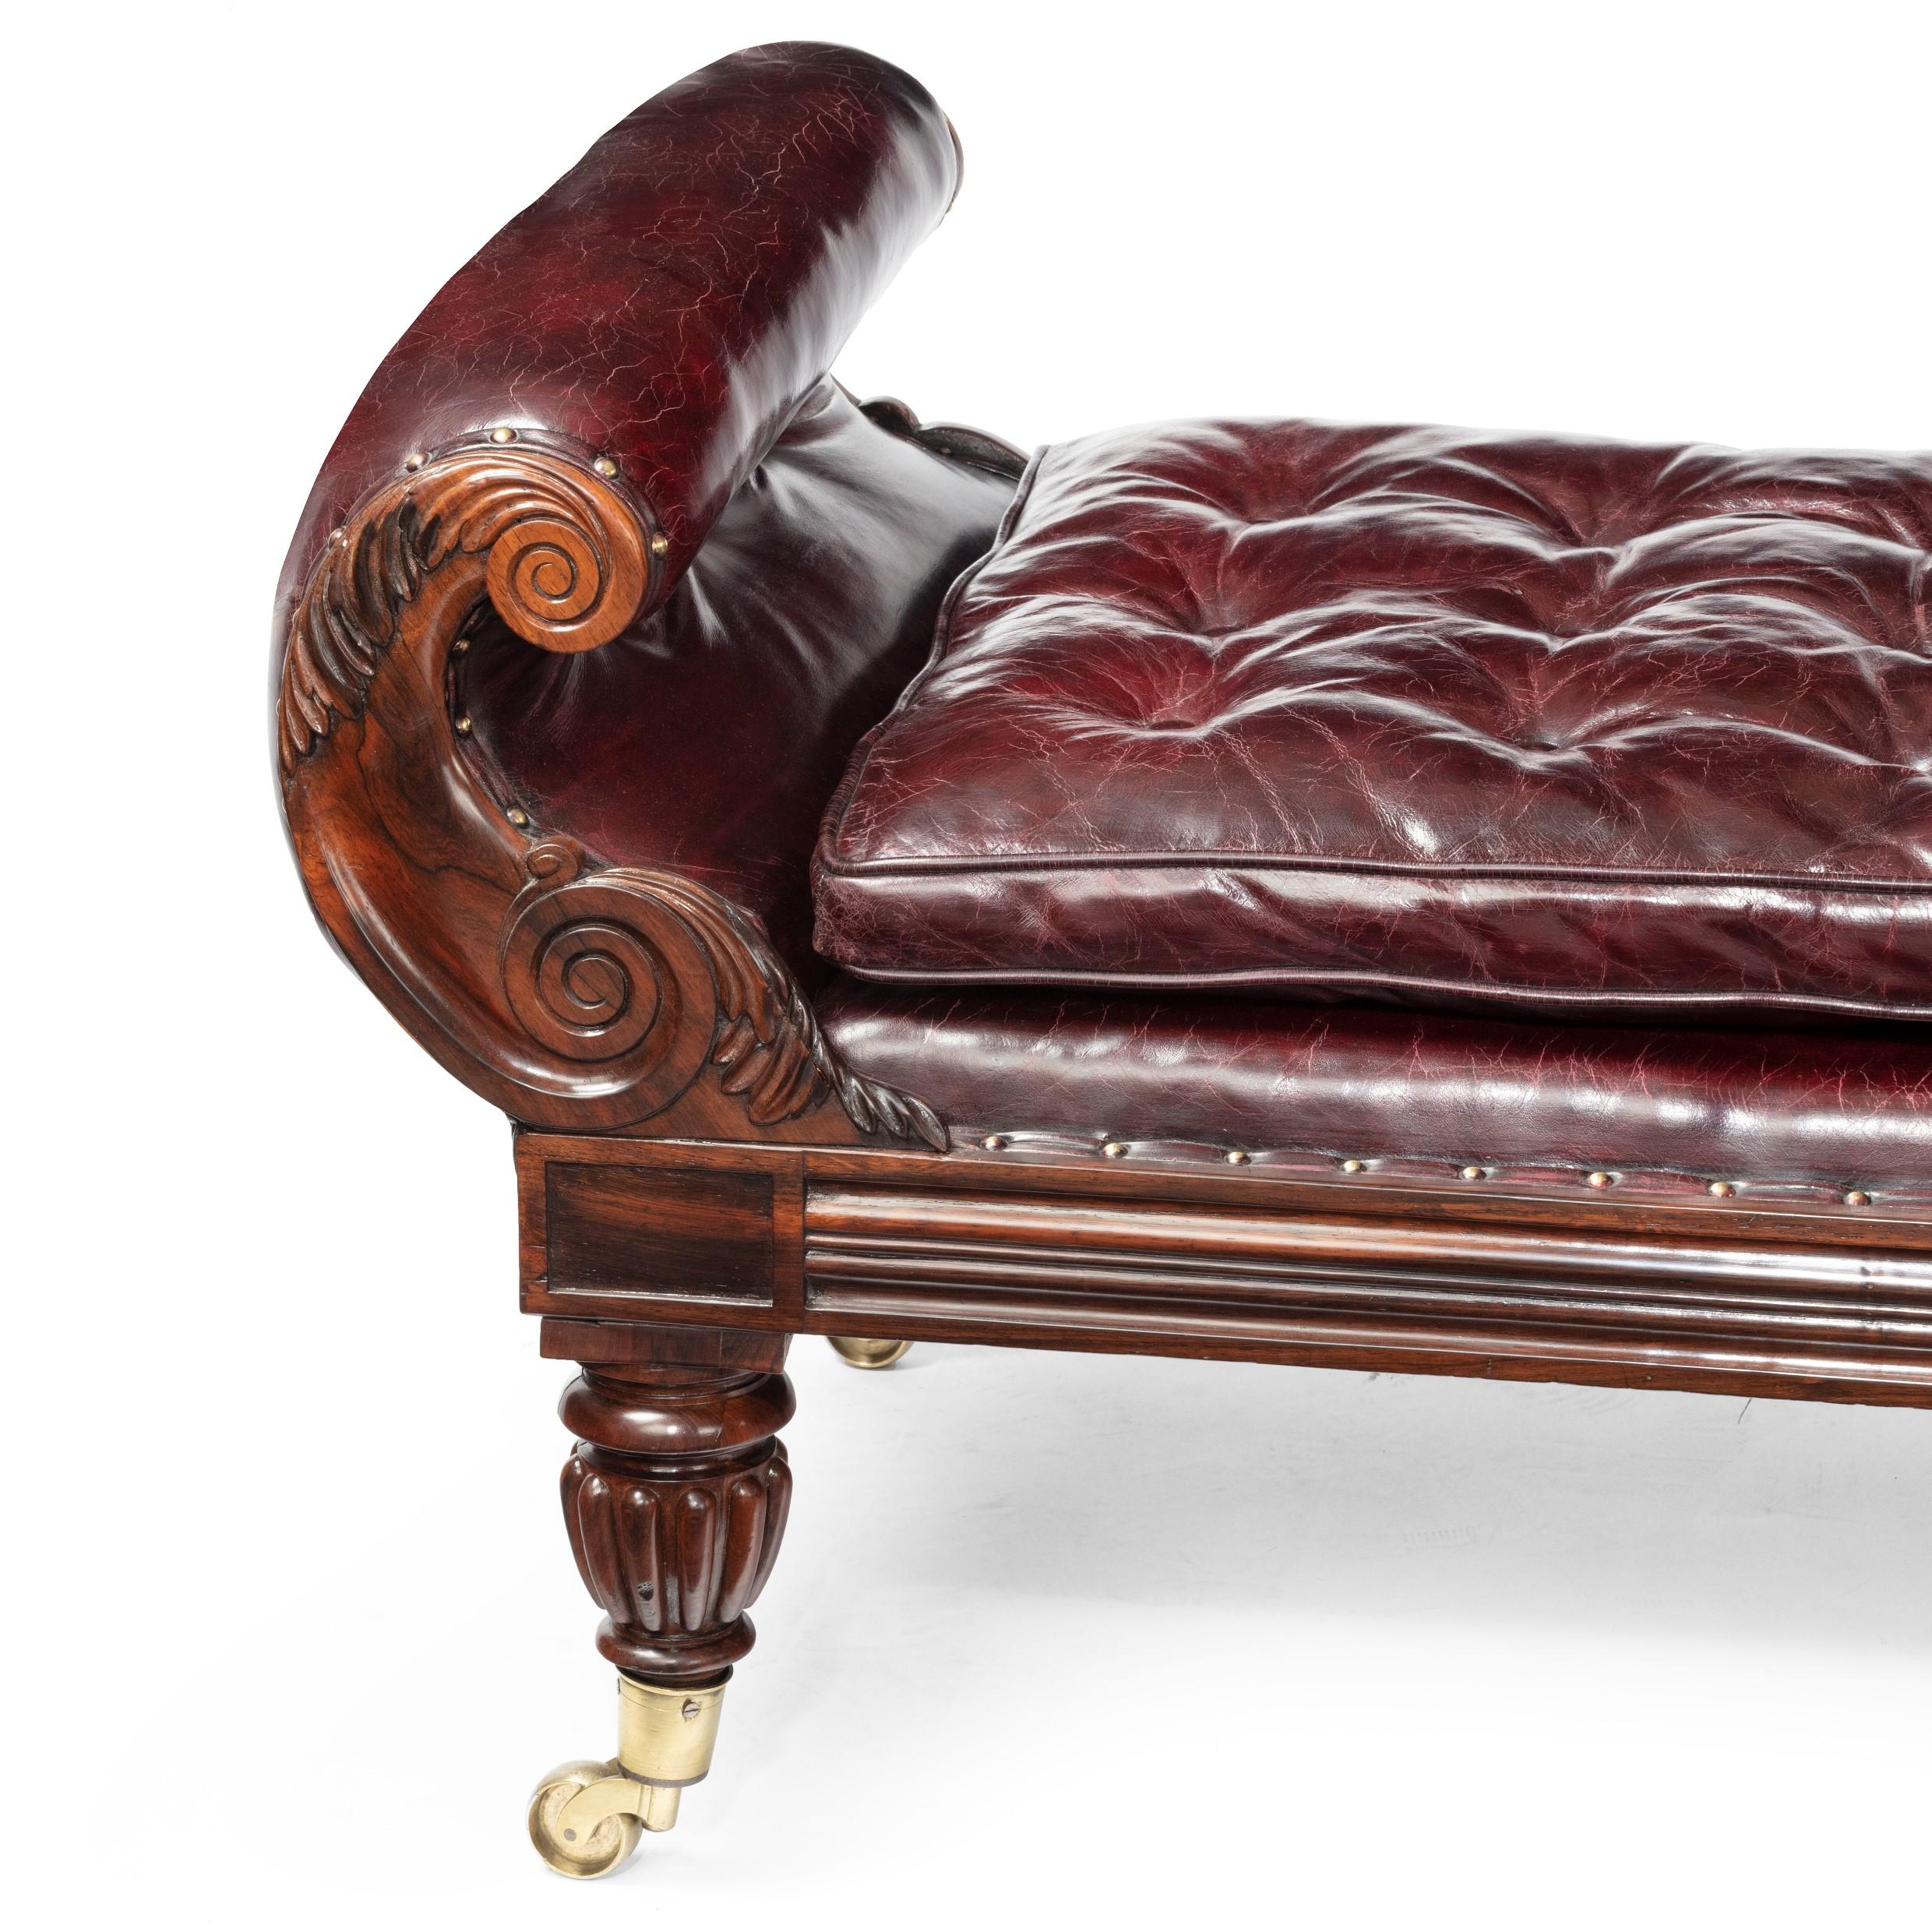 A late Regency rosewood chaise longue, with acanthus carved scroll terminals and arms, on boldly gadrooned tapering legs with the original brass castors, re-upholstered in distressed deep-buttoned burgundy leather, English, circa 1820.
 